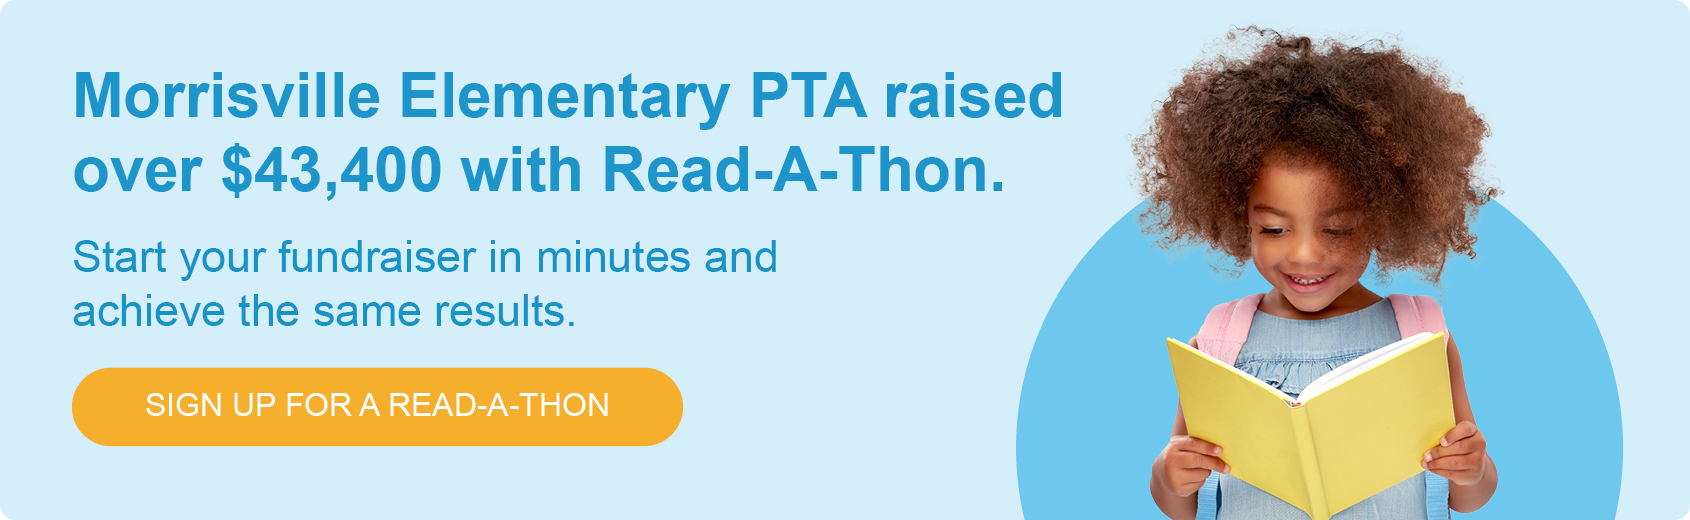 Click through to sign up for a free Read-A-Thon and start engaging your community with this highly engaging library fundraiser.